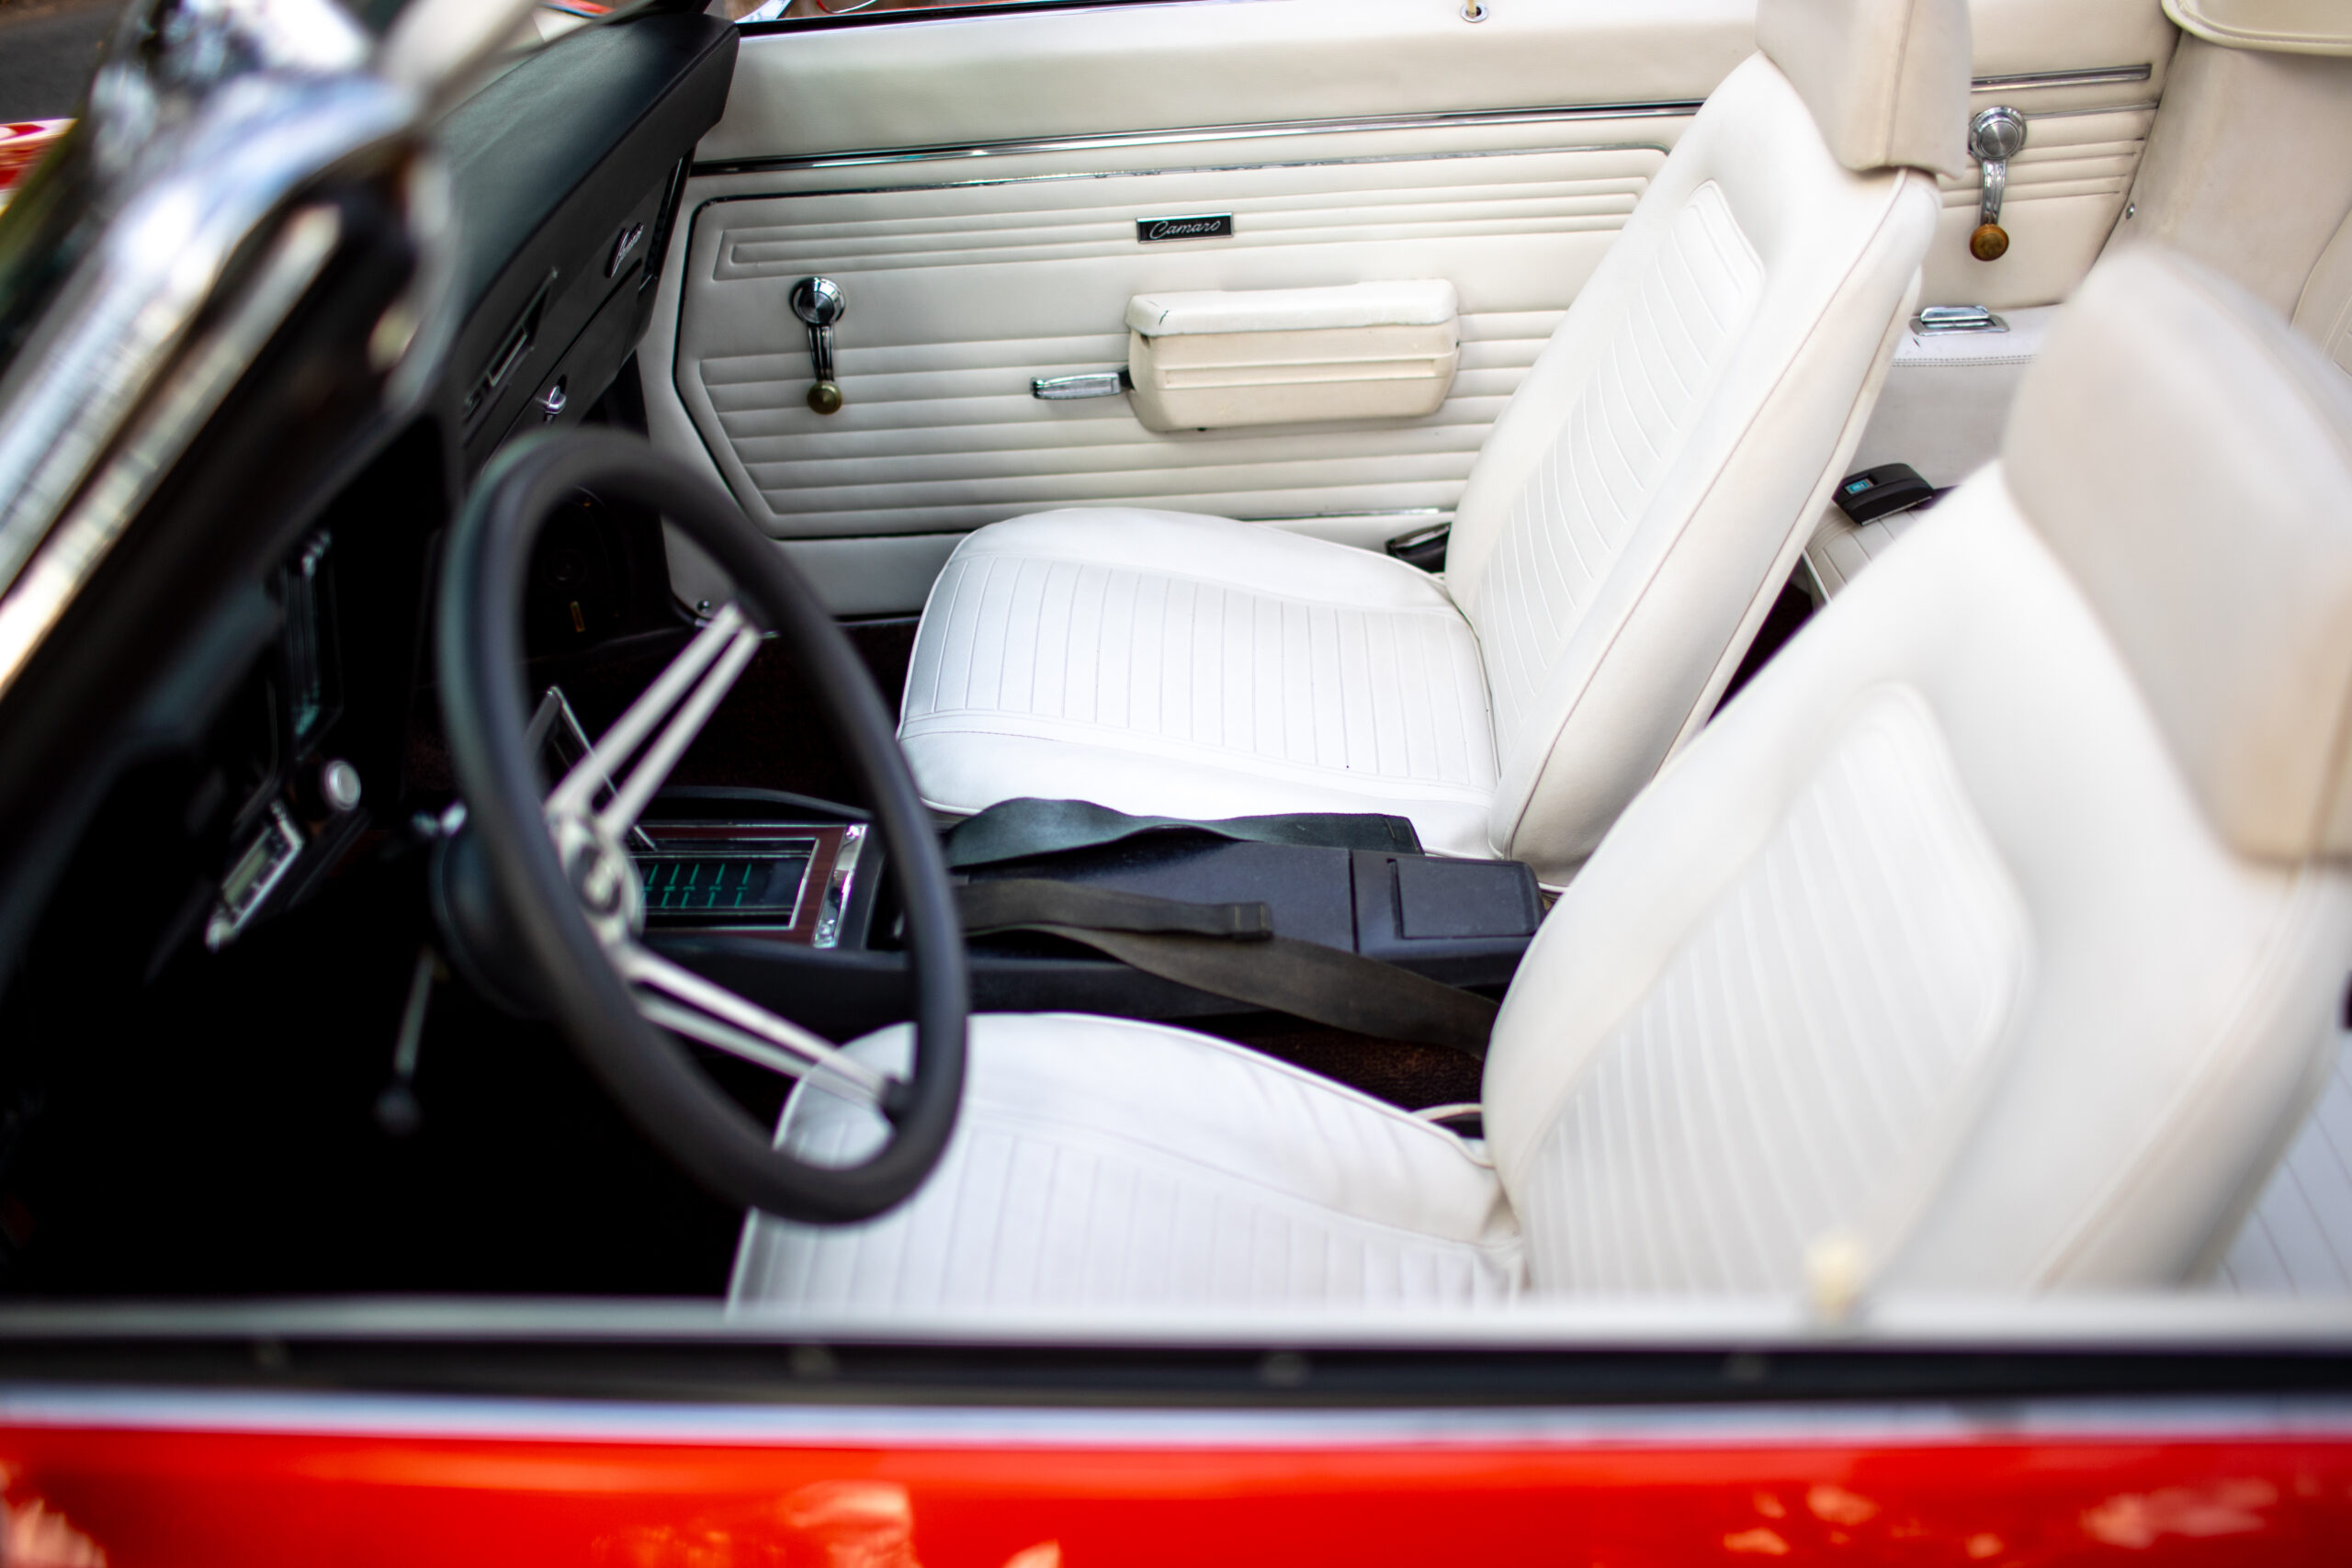 Interior view of a vintage red convertible car with white leather seats, black steering wheel, and door panel components.